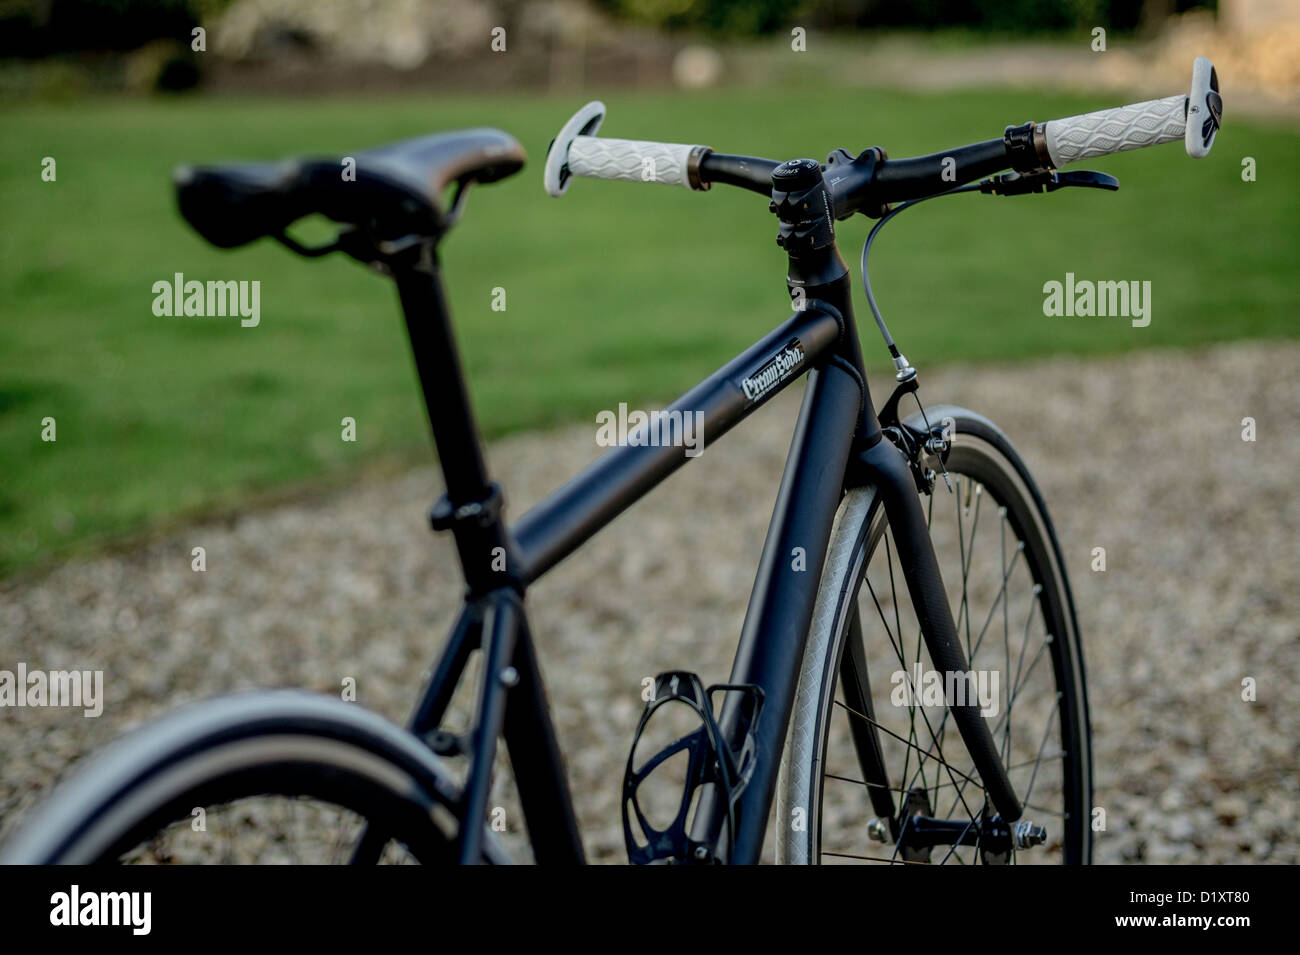 A fixie bicycle Stock Photo